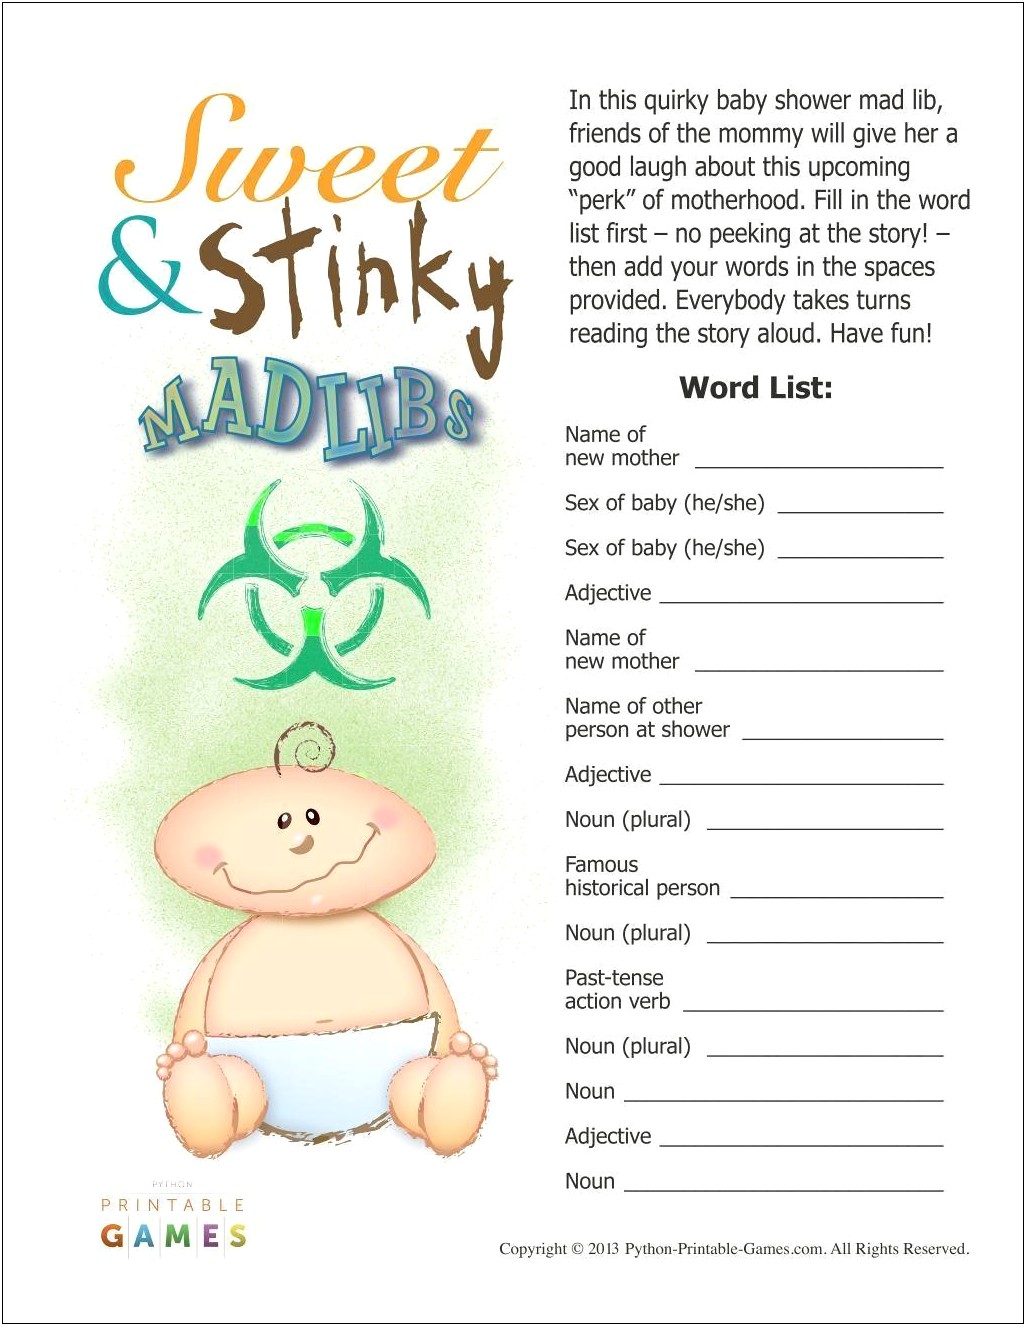 Free Baby Shower Mad Libs Template